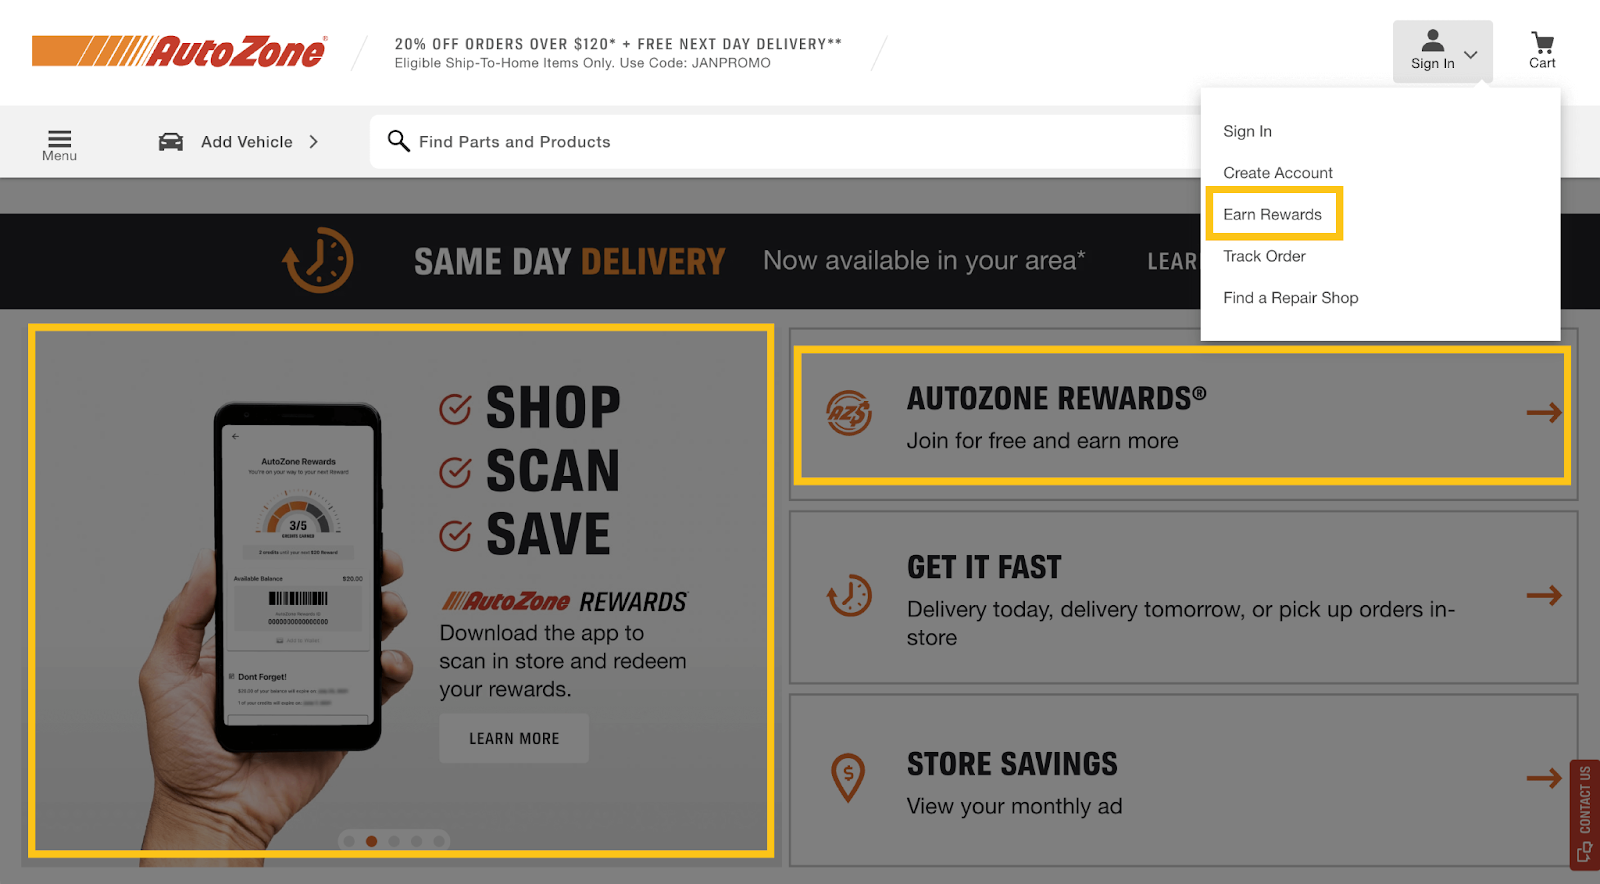 AutoZone Rewards Case Study–A screenshot of AutoZone’s homepage showing 3 different places where the AutoZone Rewards program is promoted. The first is an image of the AutoZone App, the second is a call-to-action that says “AutoZone Rewards. Join for free and earn more”, and the third is in a drop-down menu under the sign-in icon on the top right hand side of the page that says “Earn Rewards”. 